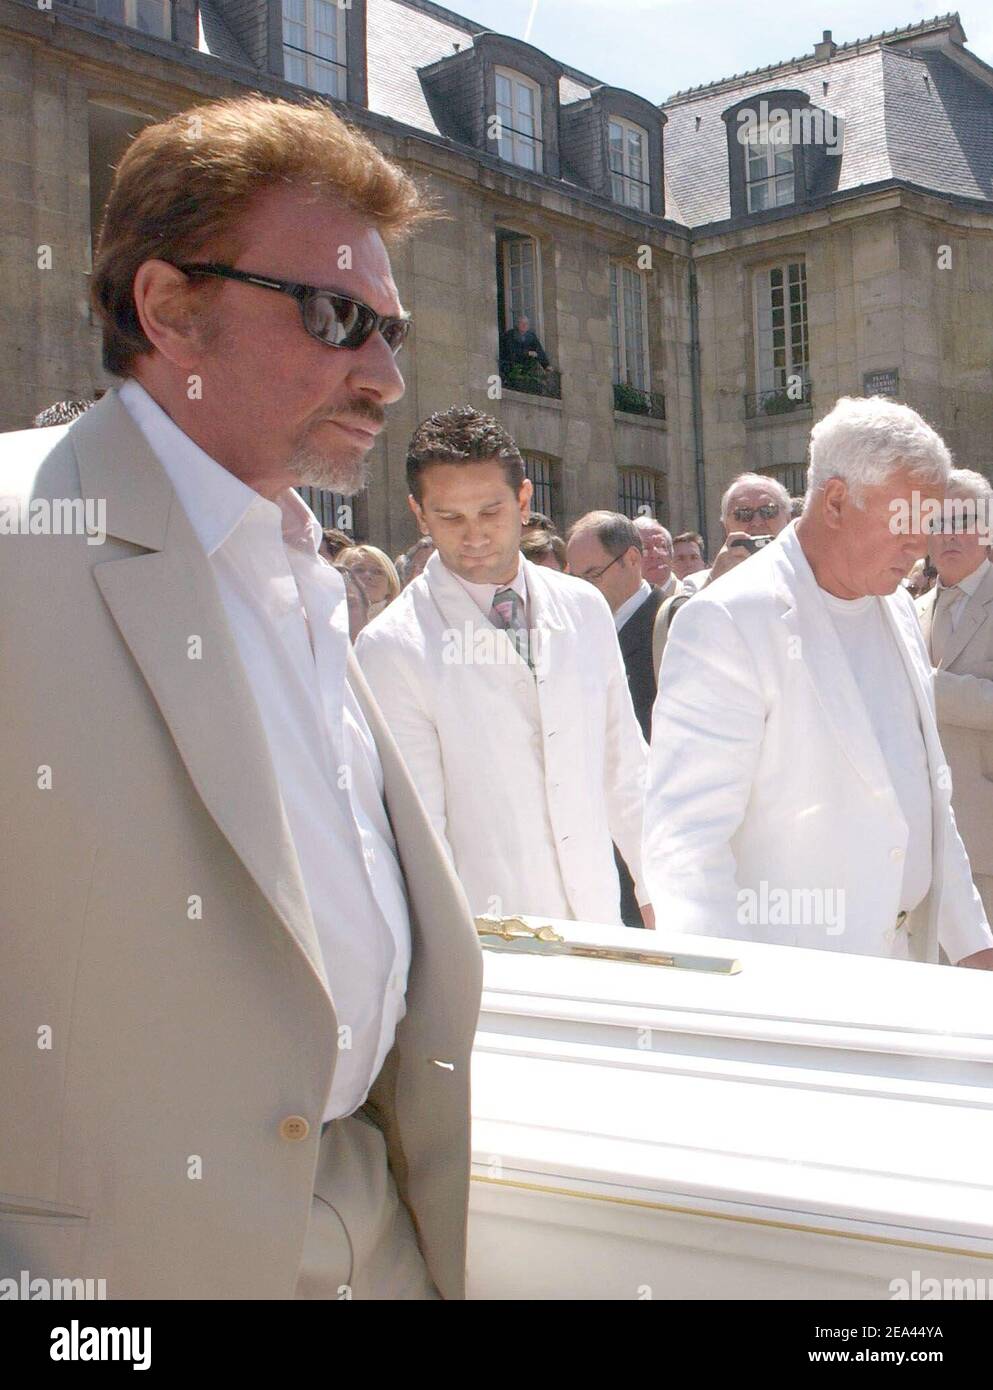 Emotion after Barclay's mass in Paris: one of the six men carrying the coffin is an usurper, a cheater (c), none of the relatives knows him, most of the people thought he was Barclay's second son, but Barclay has a single son... Singer Johnny Hallyday (r), the cheater and Stephane Collaro carry the coffin at St-Germain-des-Pres church in Paris, France, on May 18, 2005, for a mass to pay a tribute to famous French music producer Eddie Barclay who died aged 84 on last Friday. Photo by Gorassini-Mousse/ABACA Stock Photo